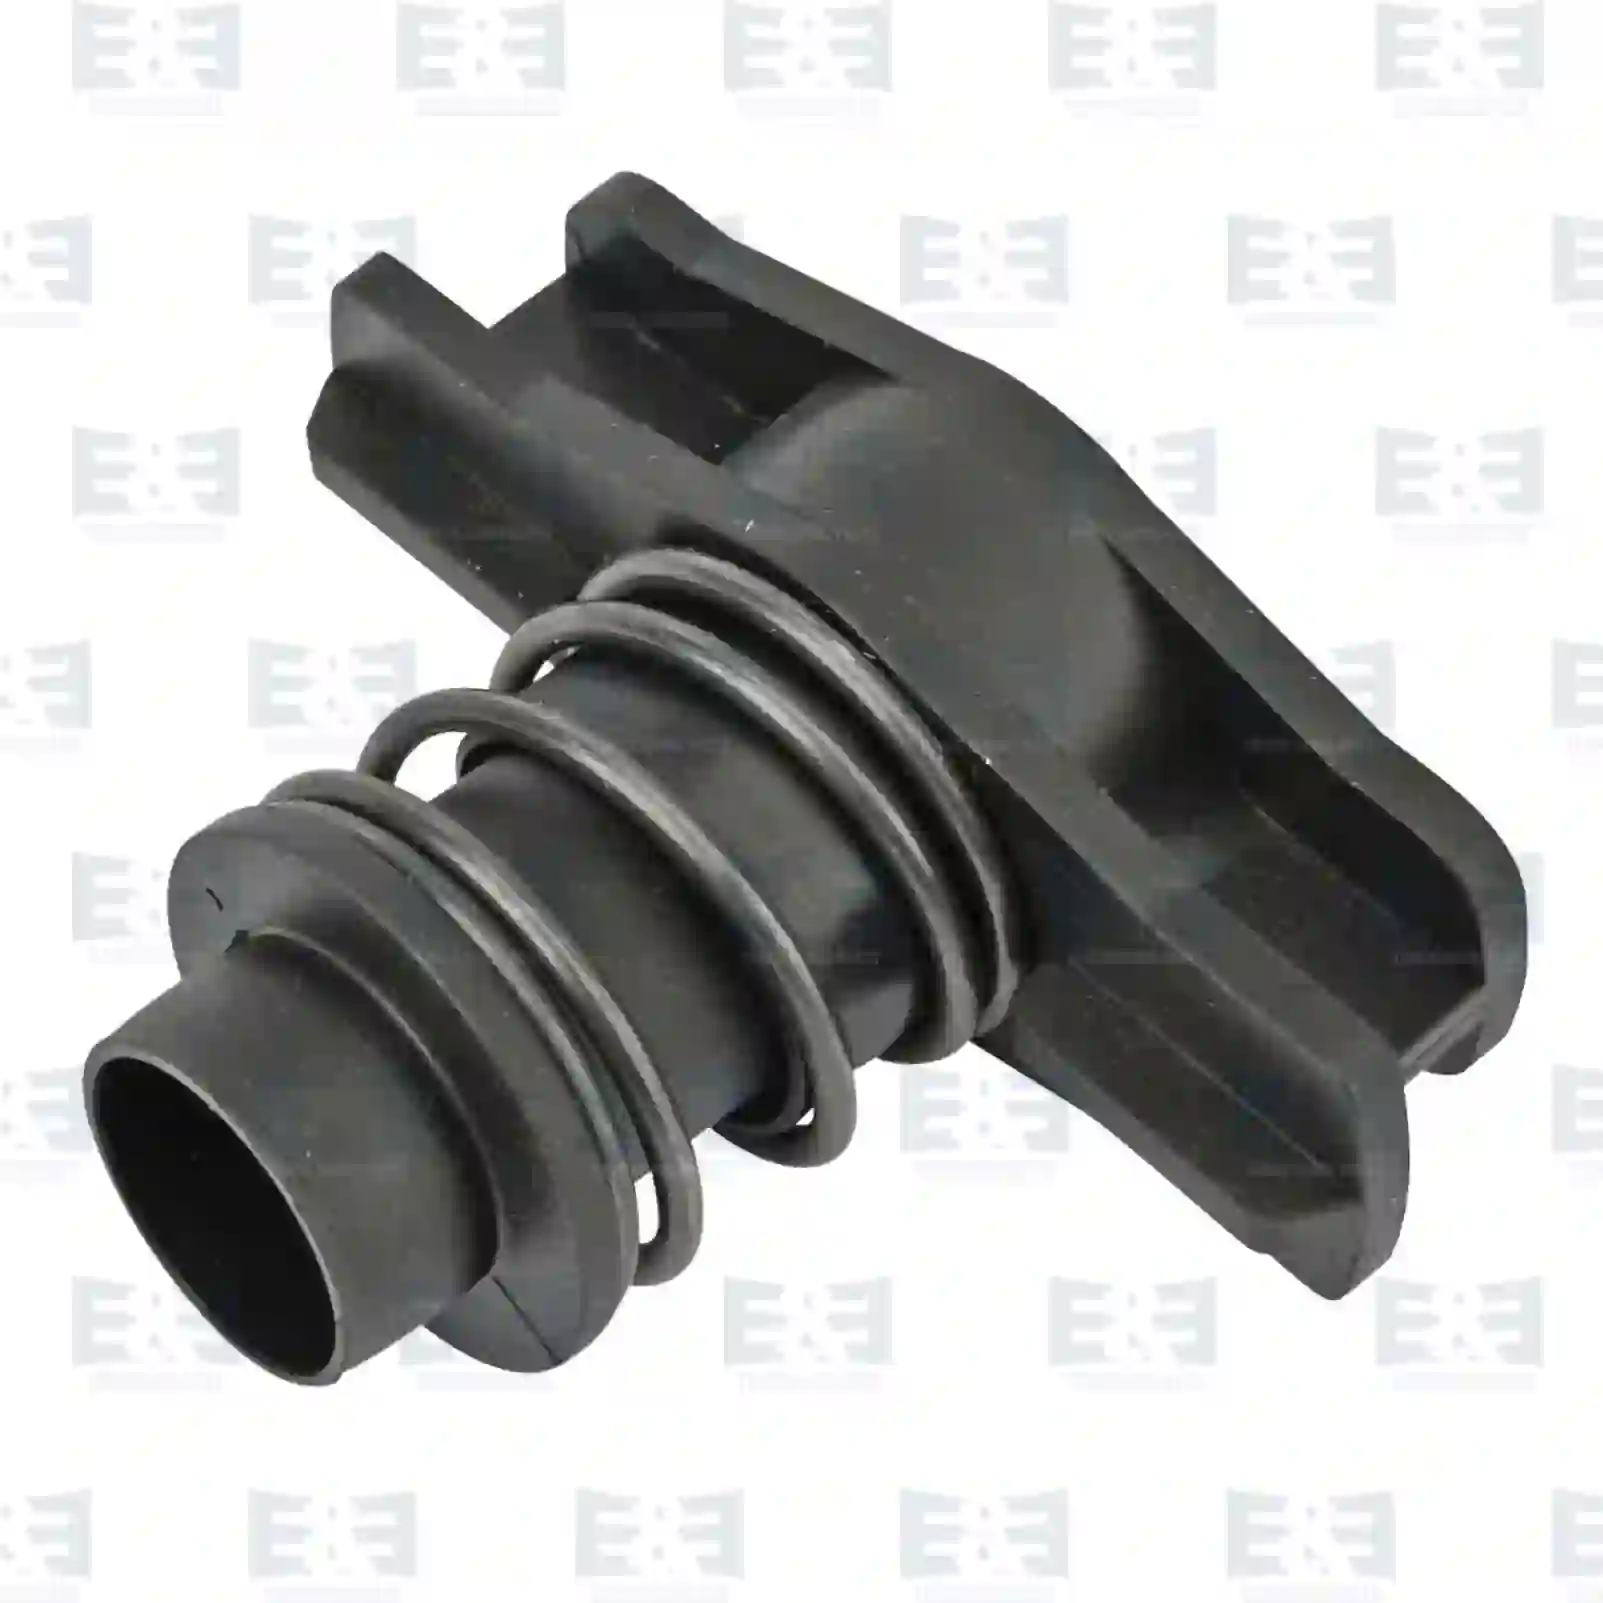 Oil Container, Steering Locking device, EE No 2E2205870 ,  oem no:0699212, 699212, 42489650, 81473400056, 0004660740, 5000814408, 7401696359, 318535, 1696359, 21392403, ZG01399-0008 E&E Truck Spare Parts | Truck Spare Parts, Auotomotive Spare Parts